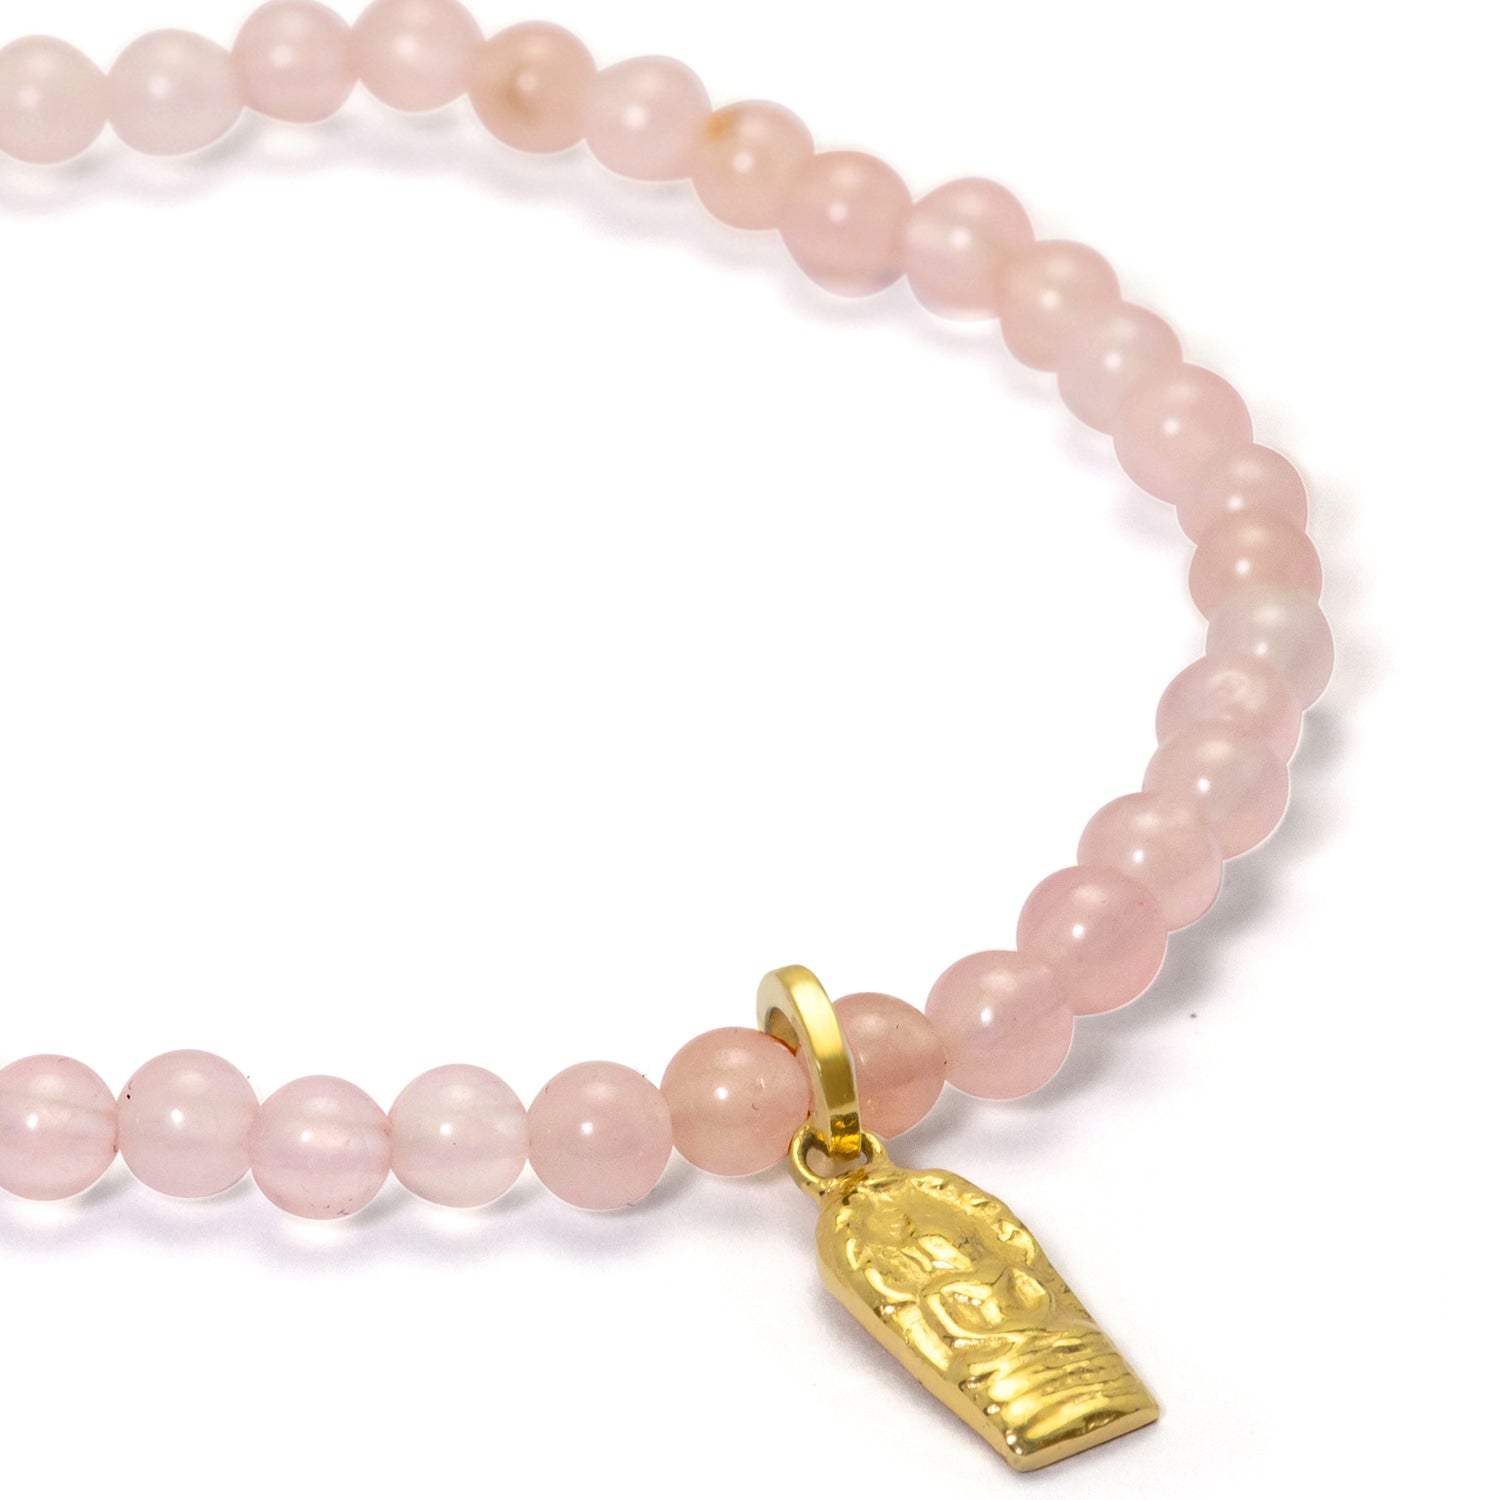 Buddha bracelet mini with rose quartz and gold-plated silver pendant from ETERNAL BLISS - Spiritual jewelry